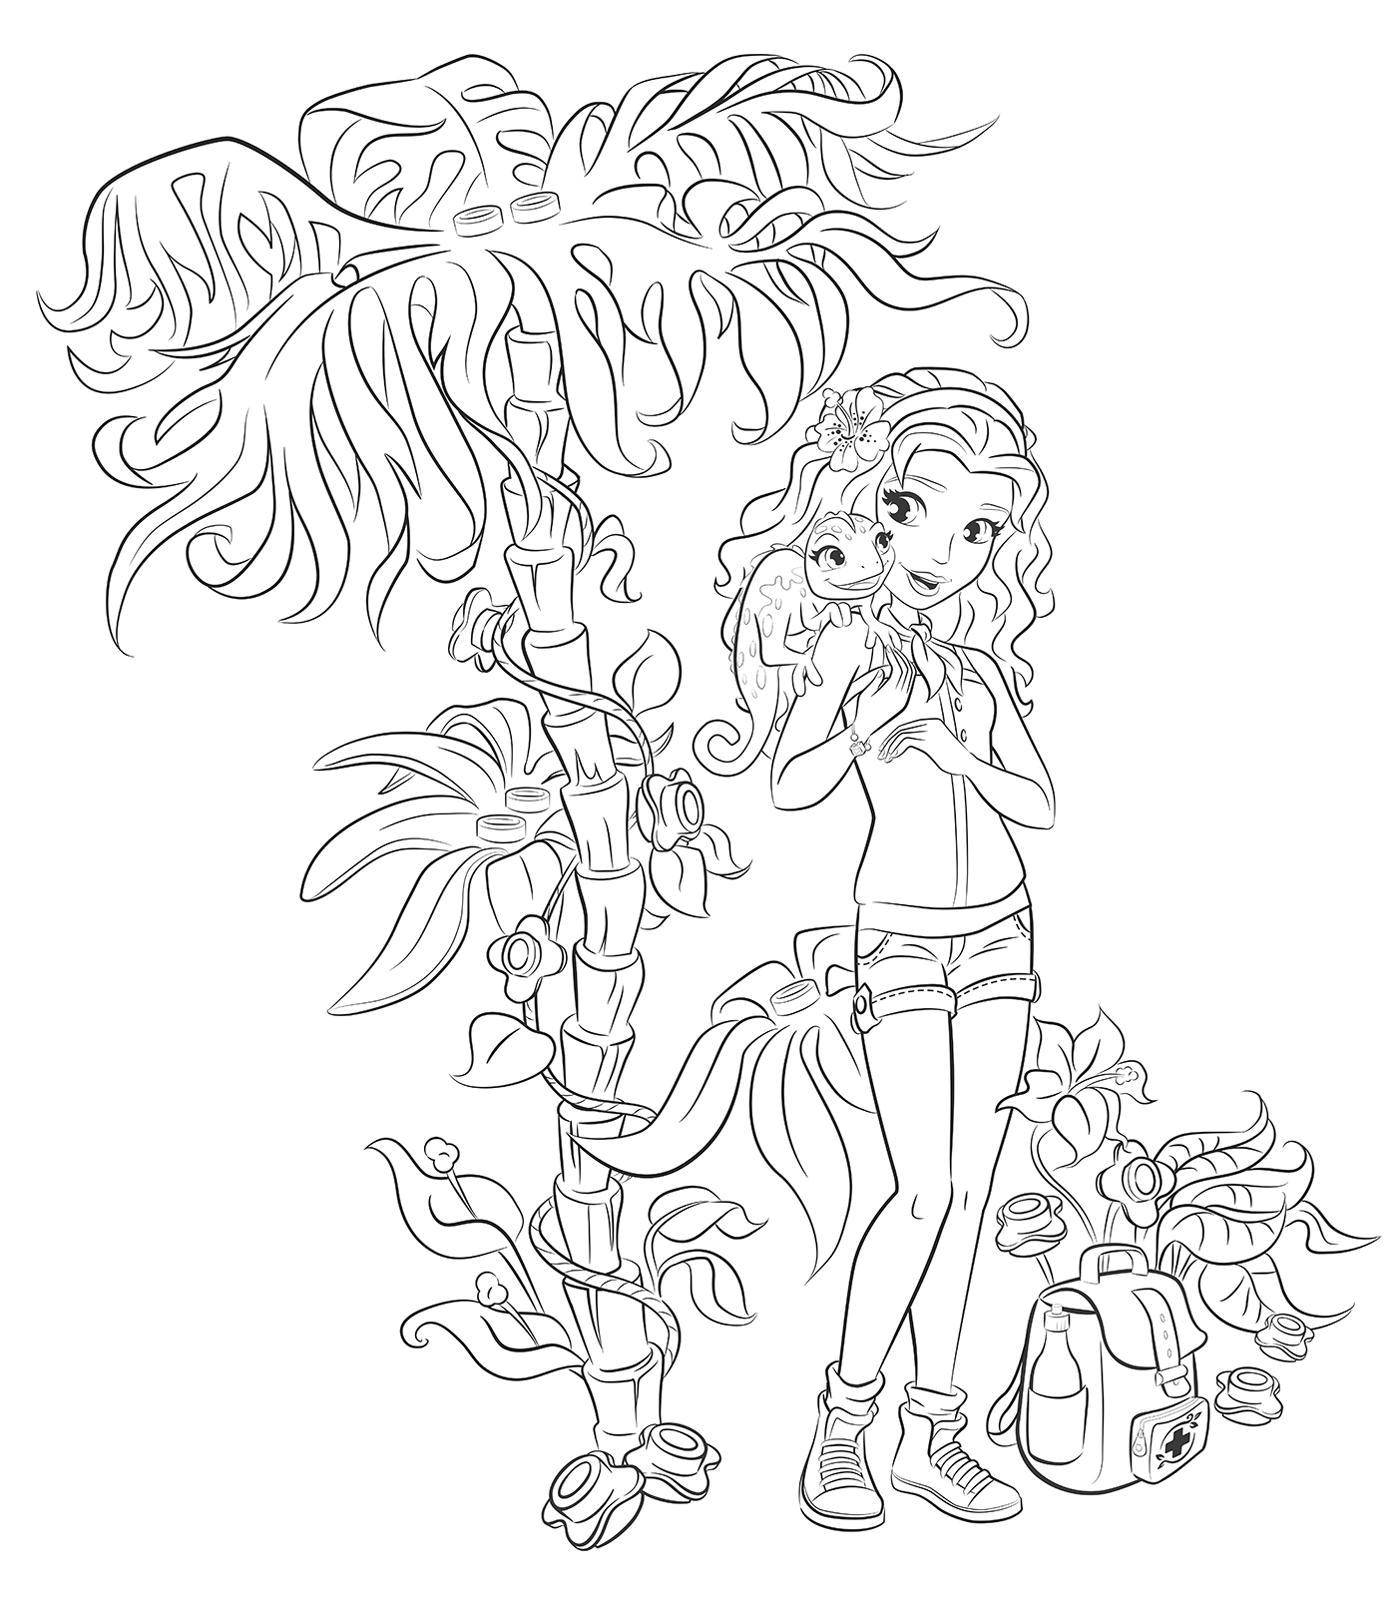 Coloring Girl with a chameleon. Category coloring pages for girls. Tags:  Girl, beauty, fashionista, fashion.